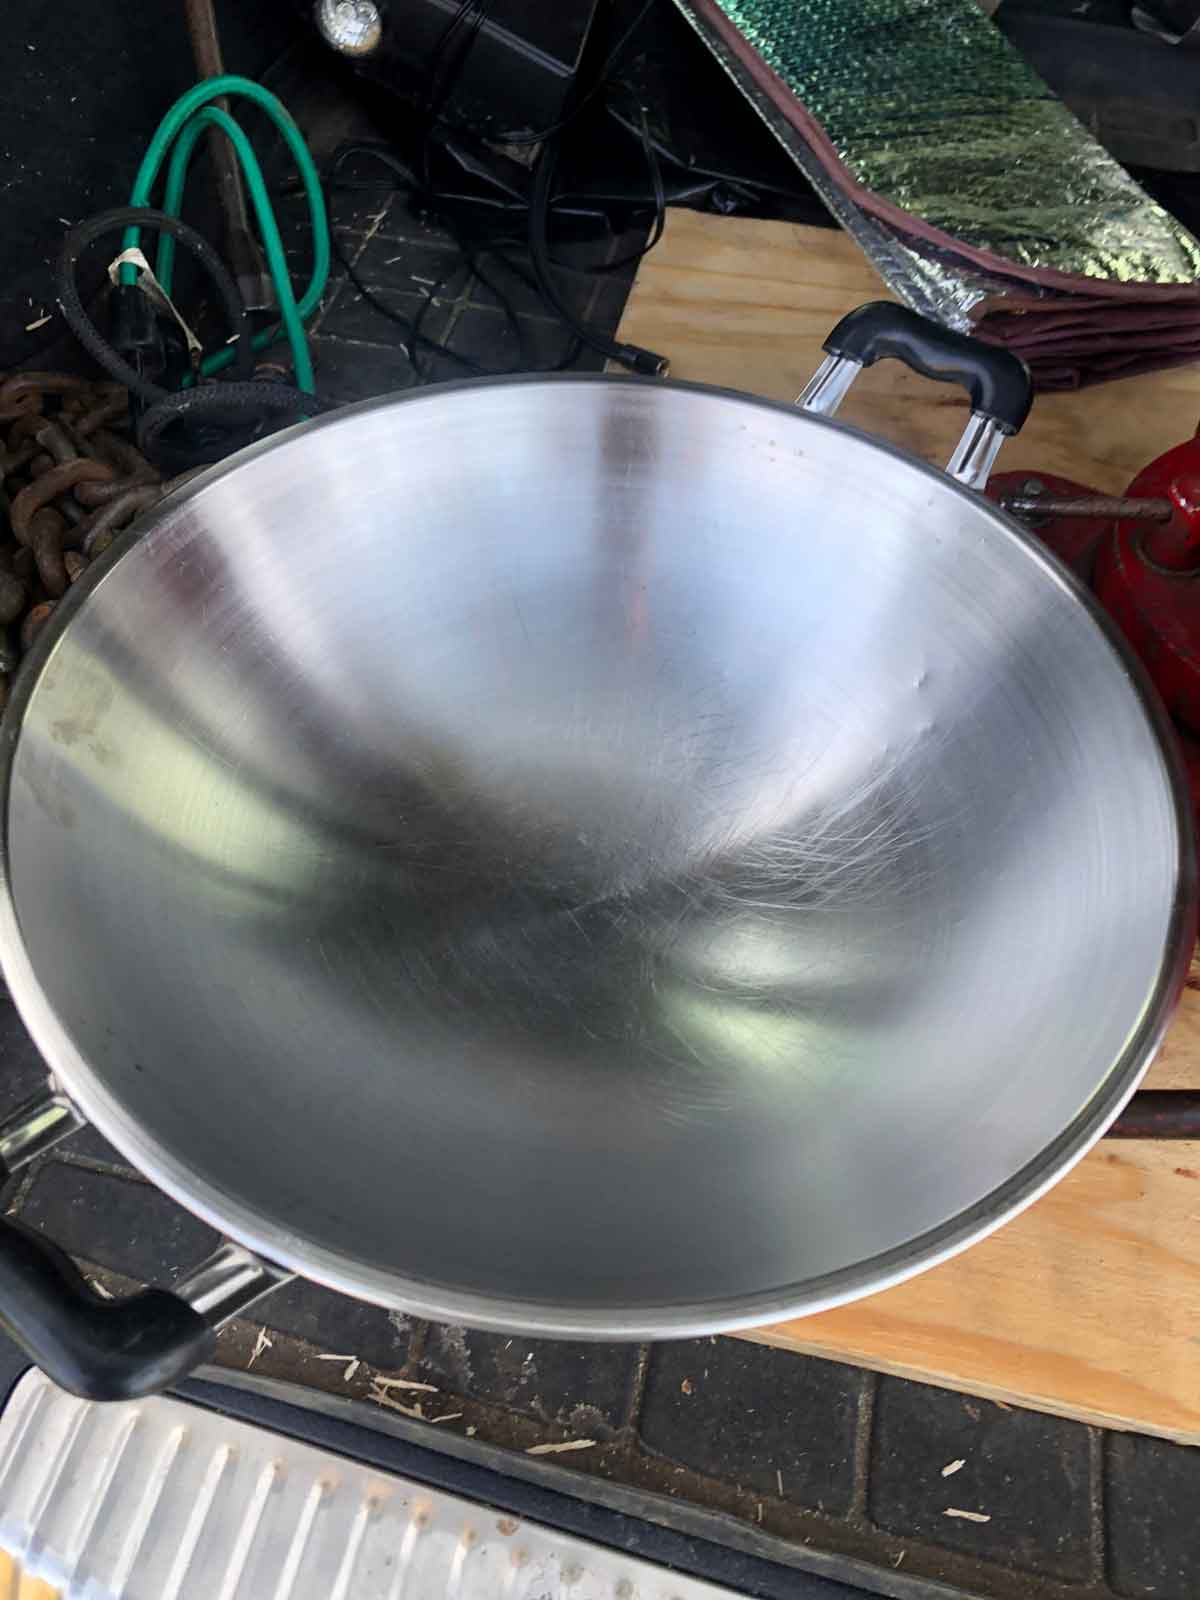 A stainless steel wok I use to gather the petals from the dayflower when I'm out foraging pigments.